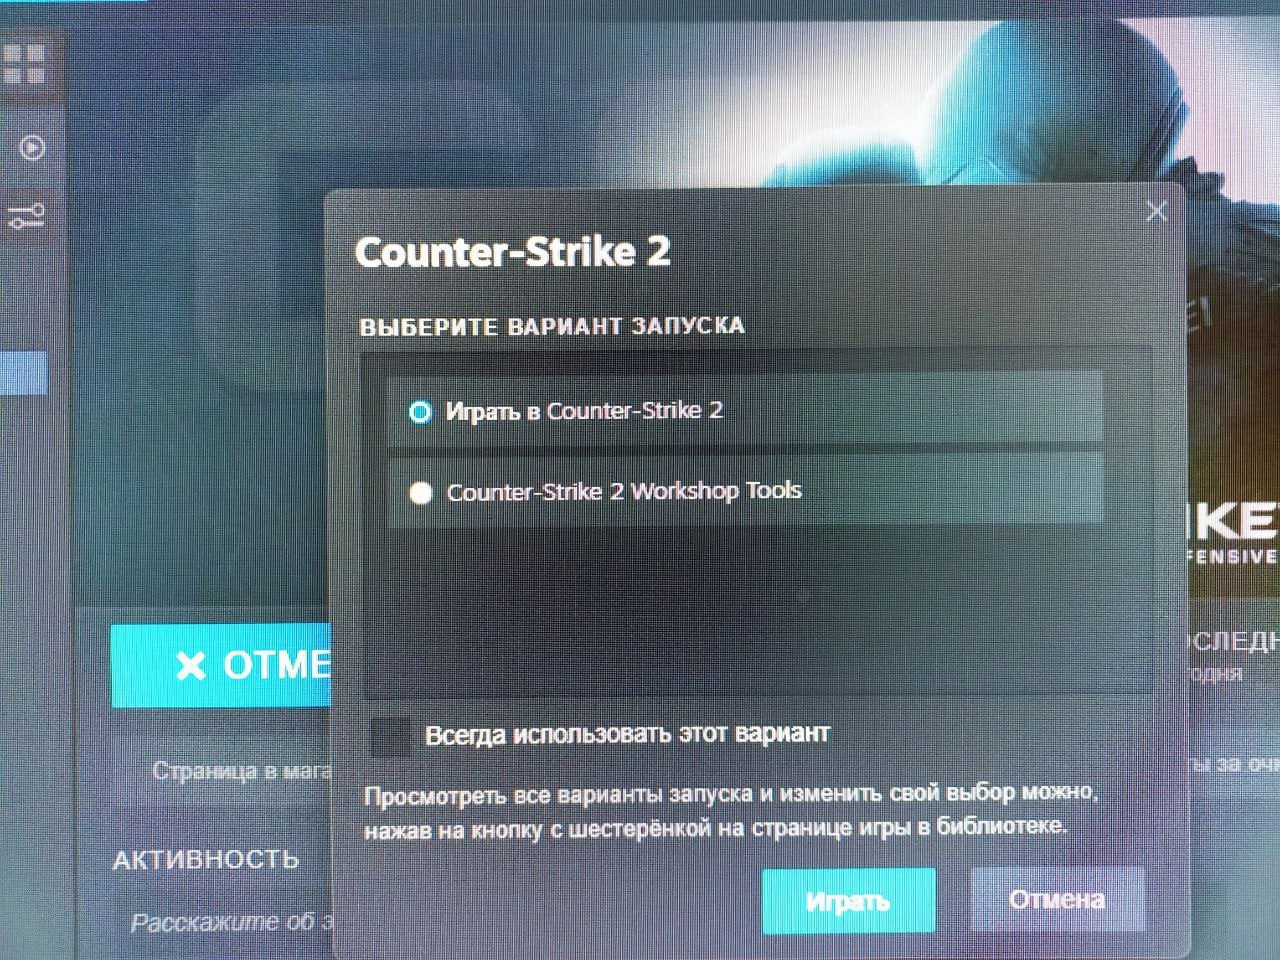 ошибка в кс fatal error failed to connect with local steam client process фото 14